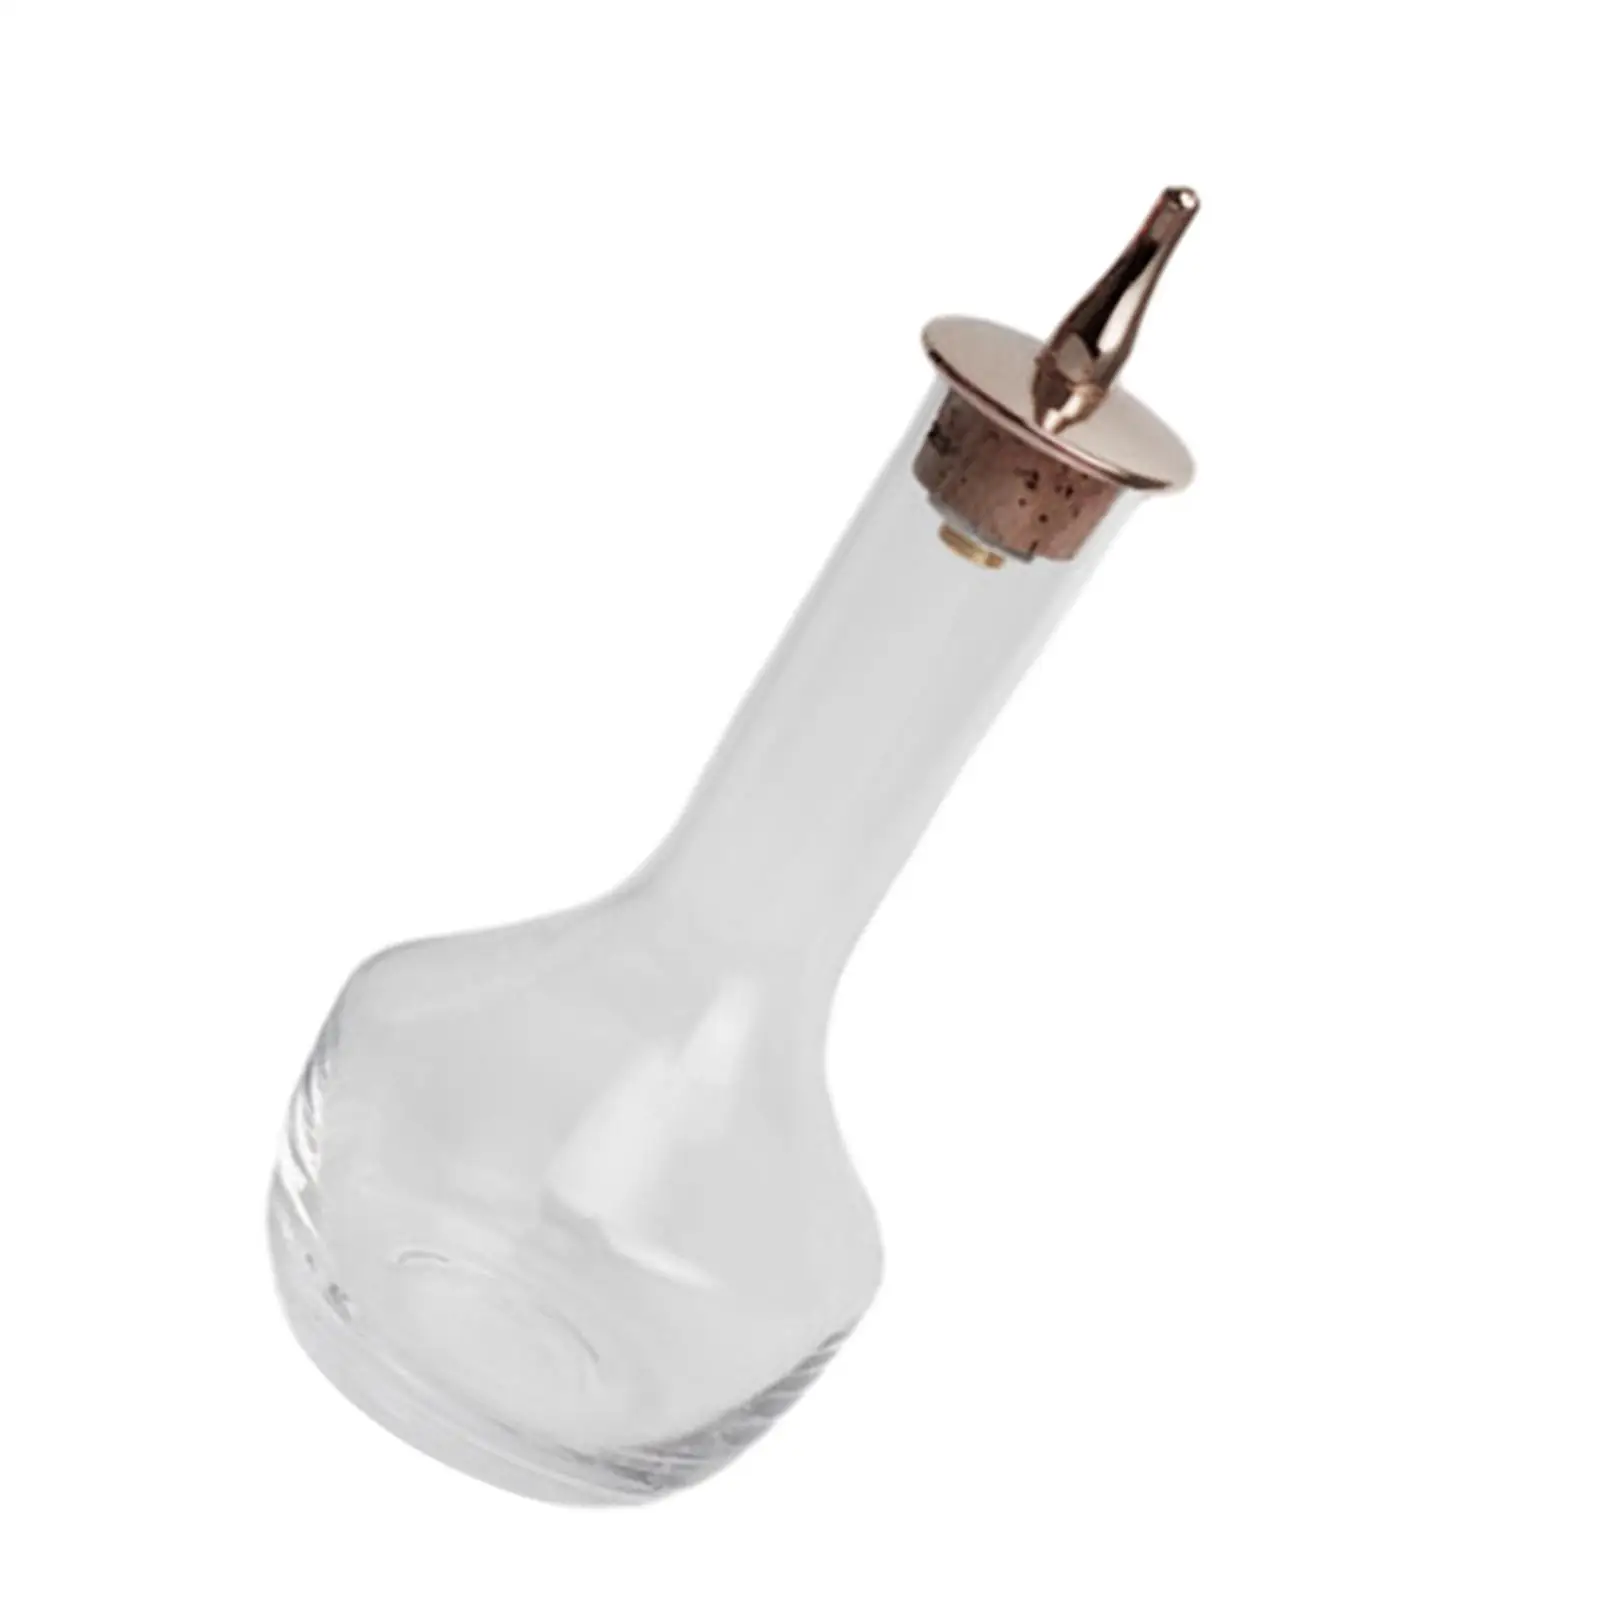 Cocktail Bitter Bottle 50ml Barware Antique with Sturdy Stopper for Making Cocktail Mixing Drinks Dispenser Kitchen Accessories